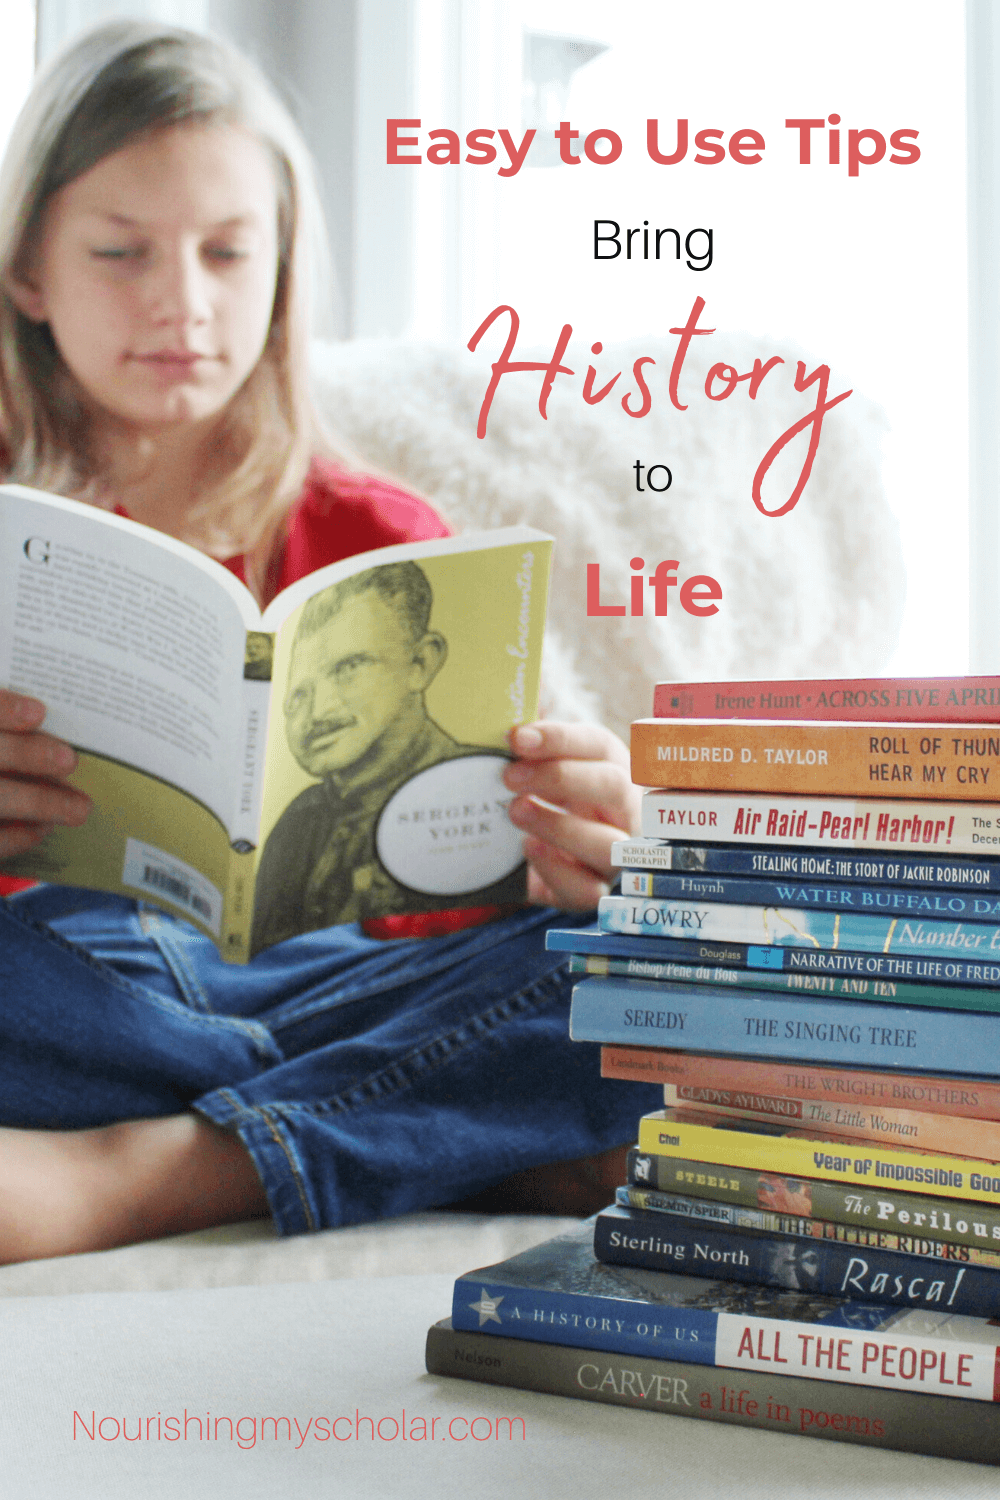 Easy to Use Tips Bring History to Life: History doesn't have to be dry and boring. Actually, it can be quite engaging if you follow these easy to use history tips! #homeschool #history #historyfun #homeschooling #historyunitstudy #handsonhistory #historyactivities